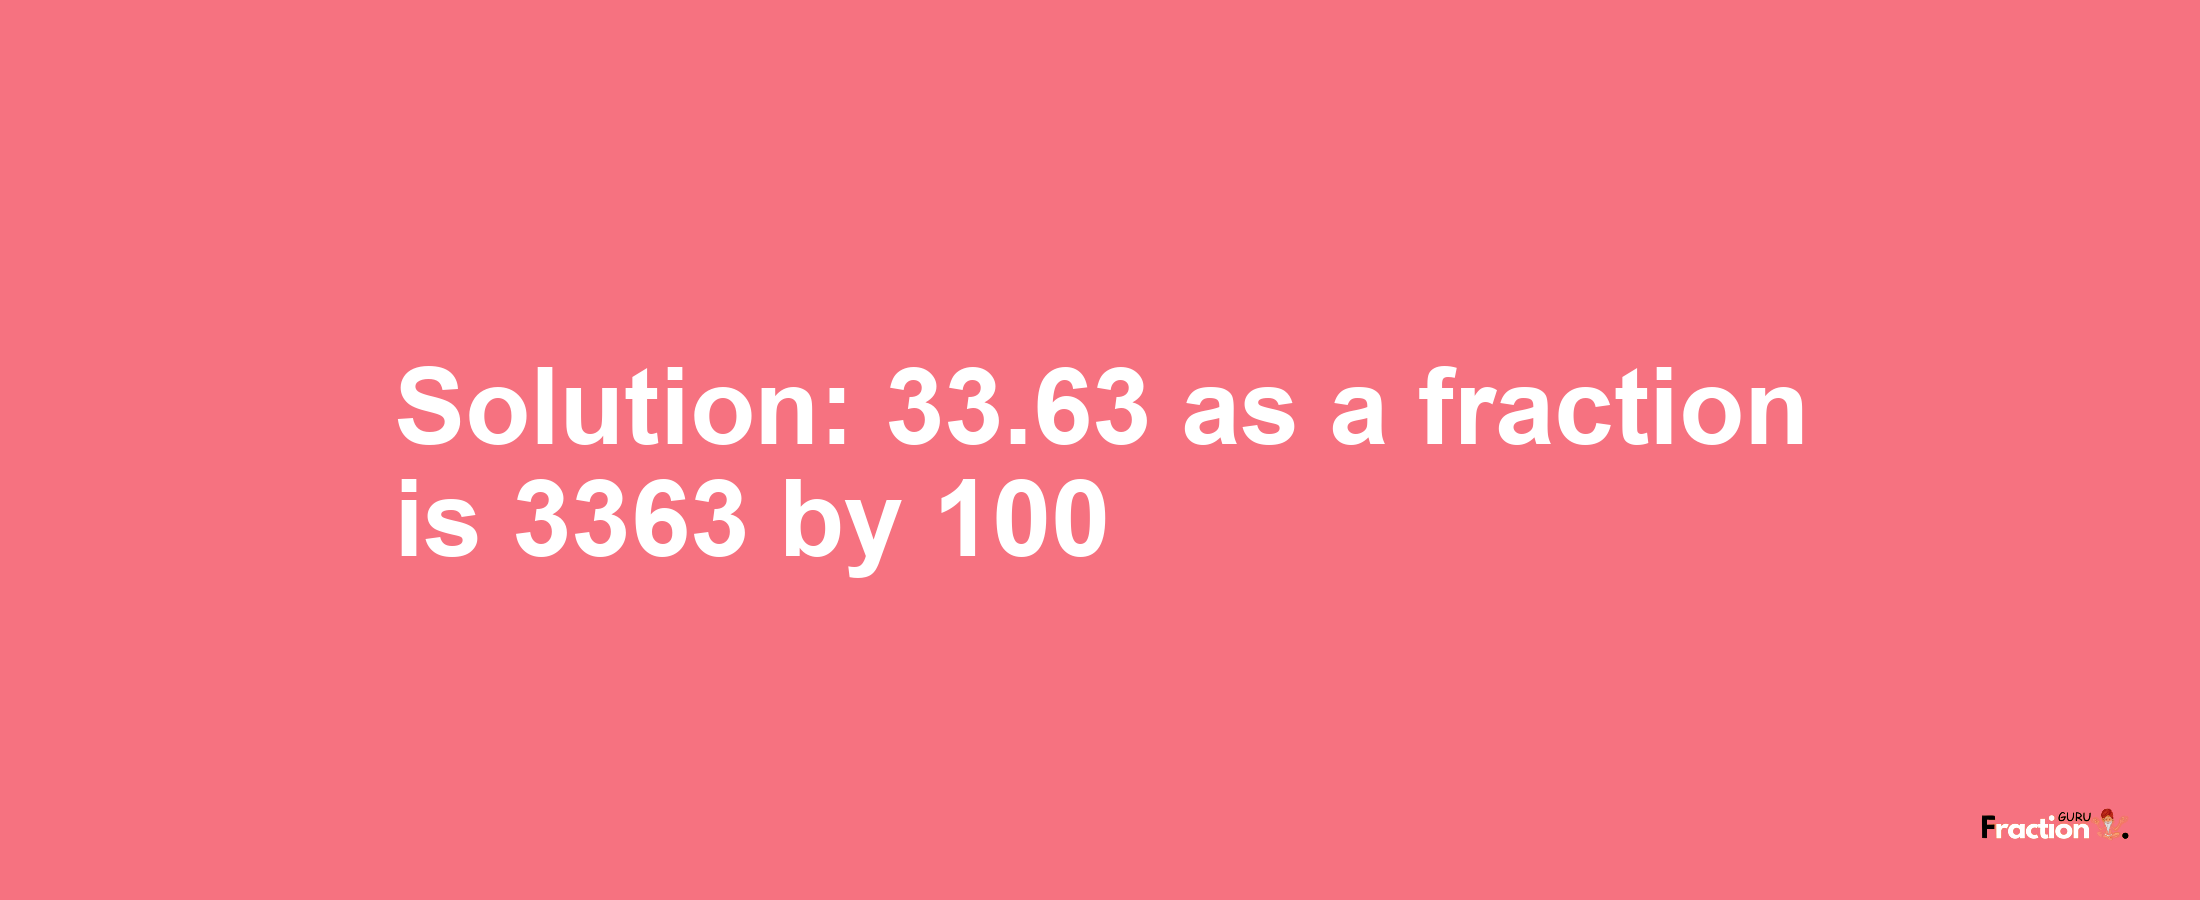 Solution:33.63 as a fraction is 3363/100